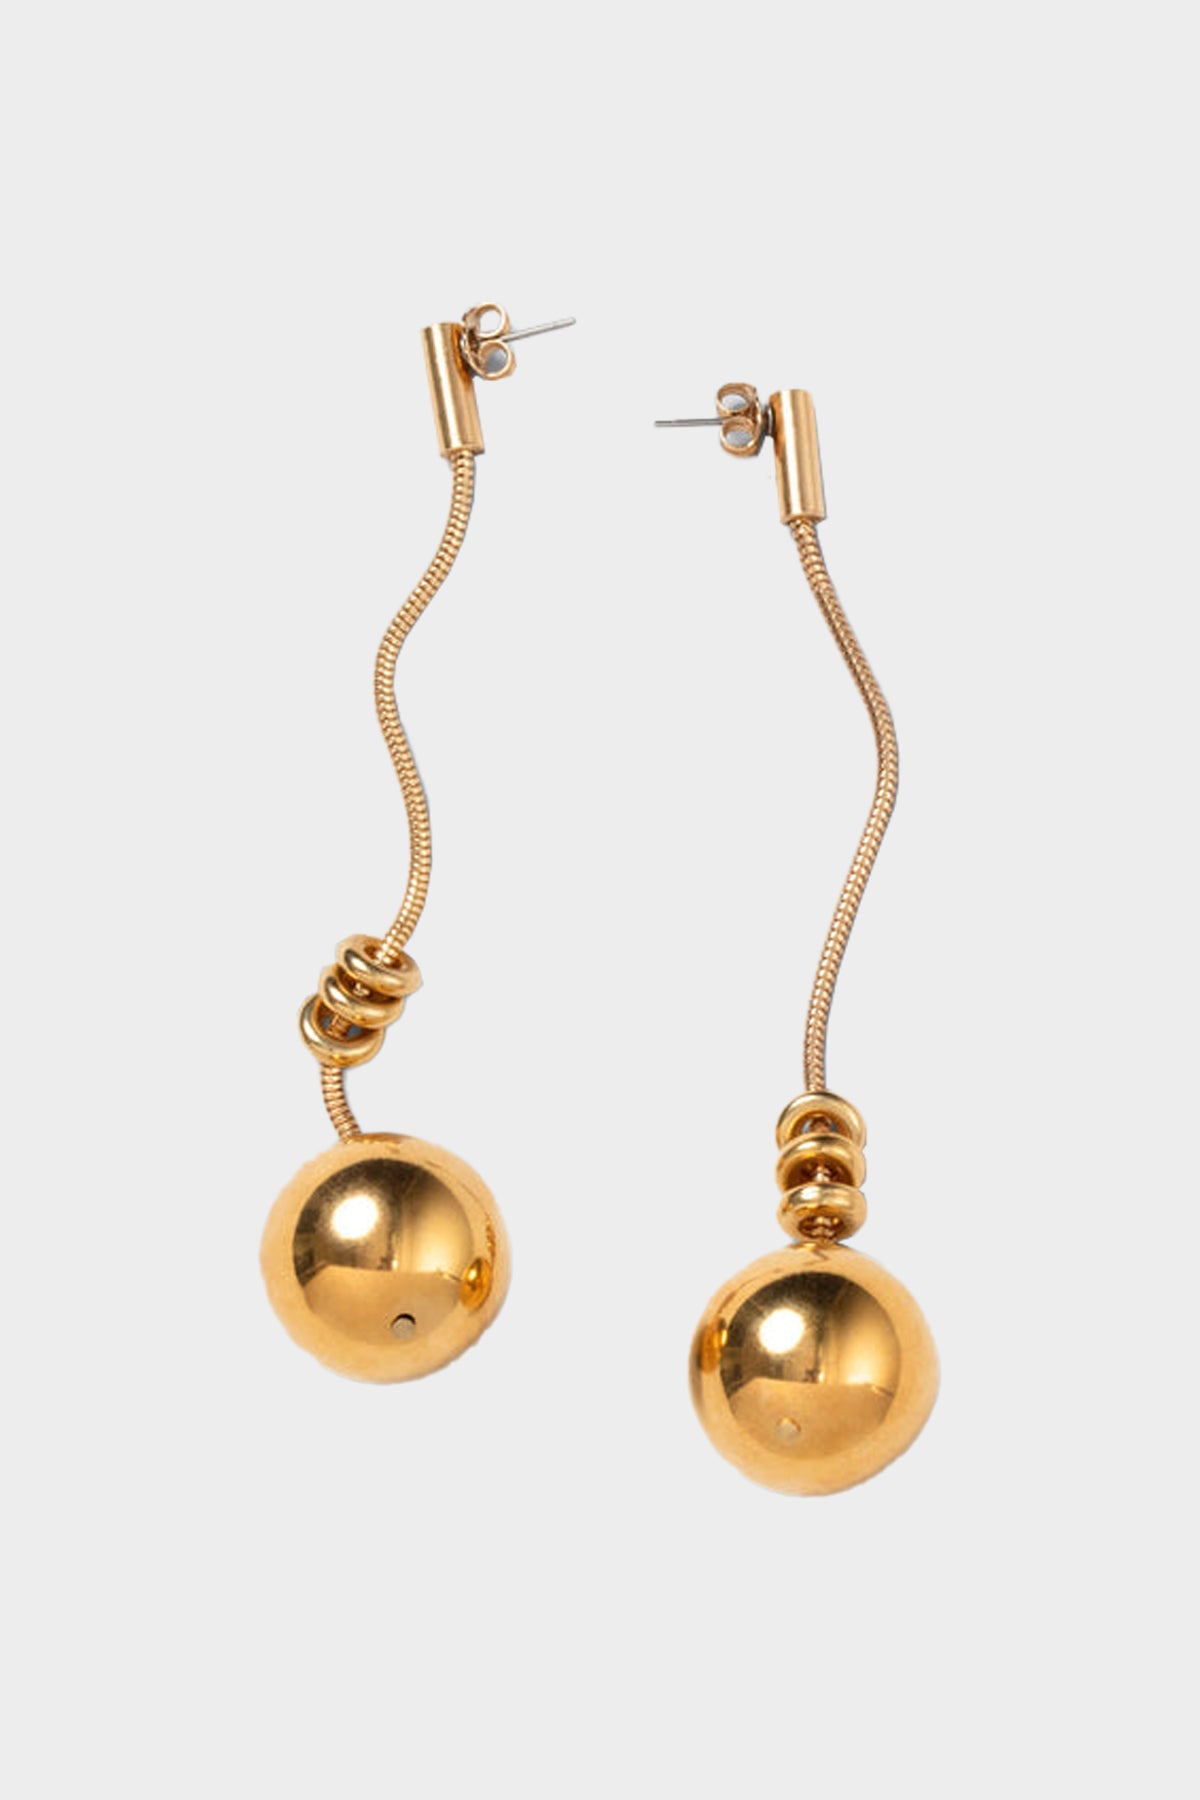 Sway Earrings in Gold - shop-olivia.com